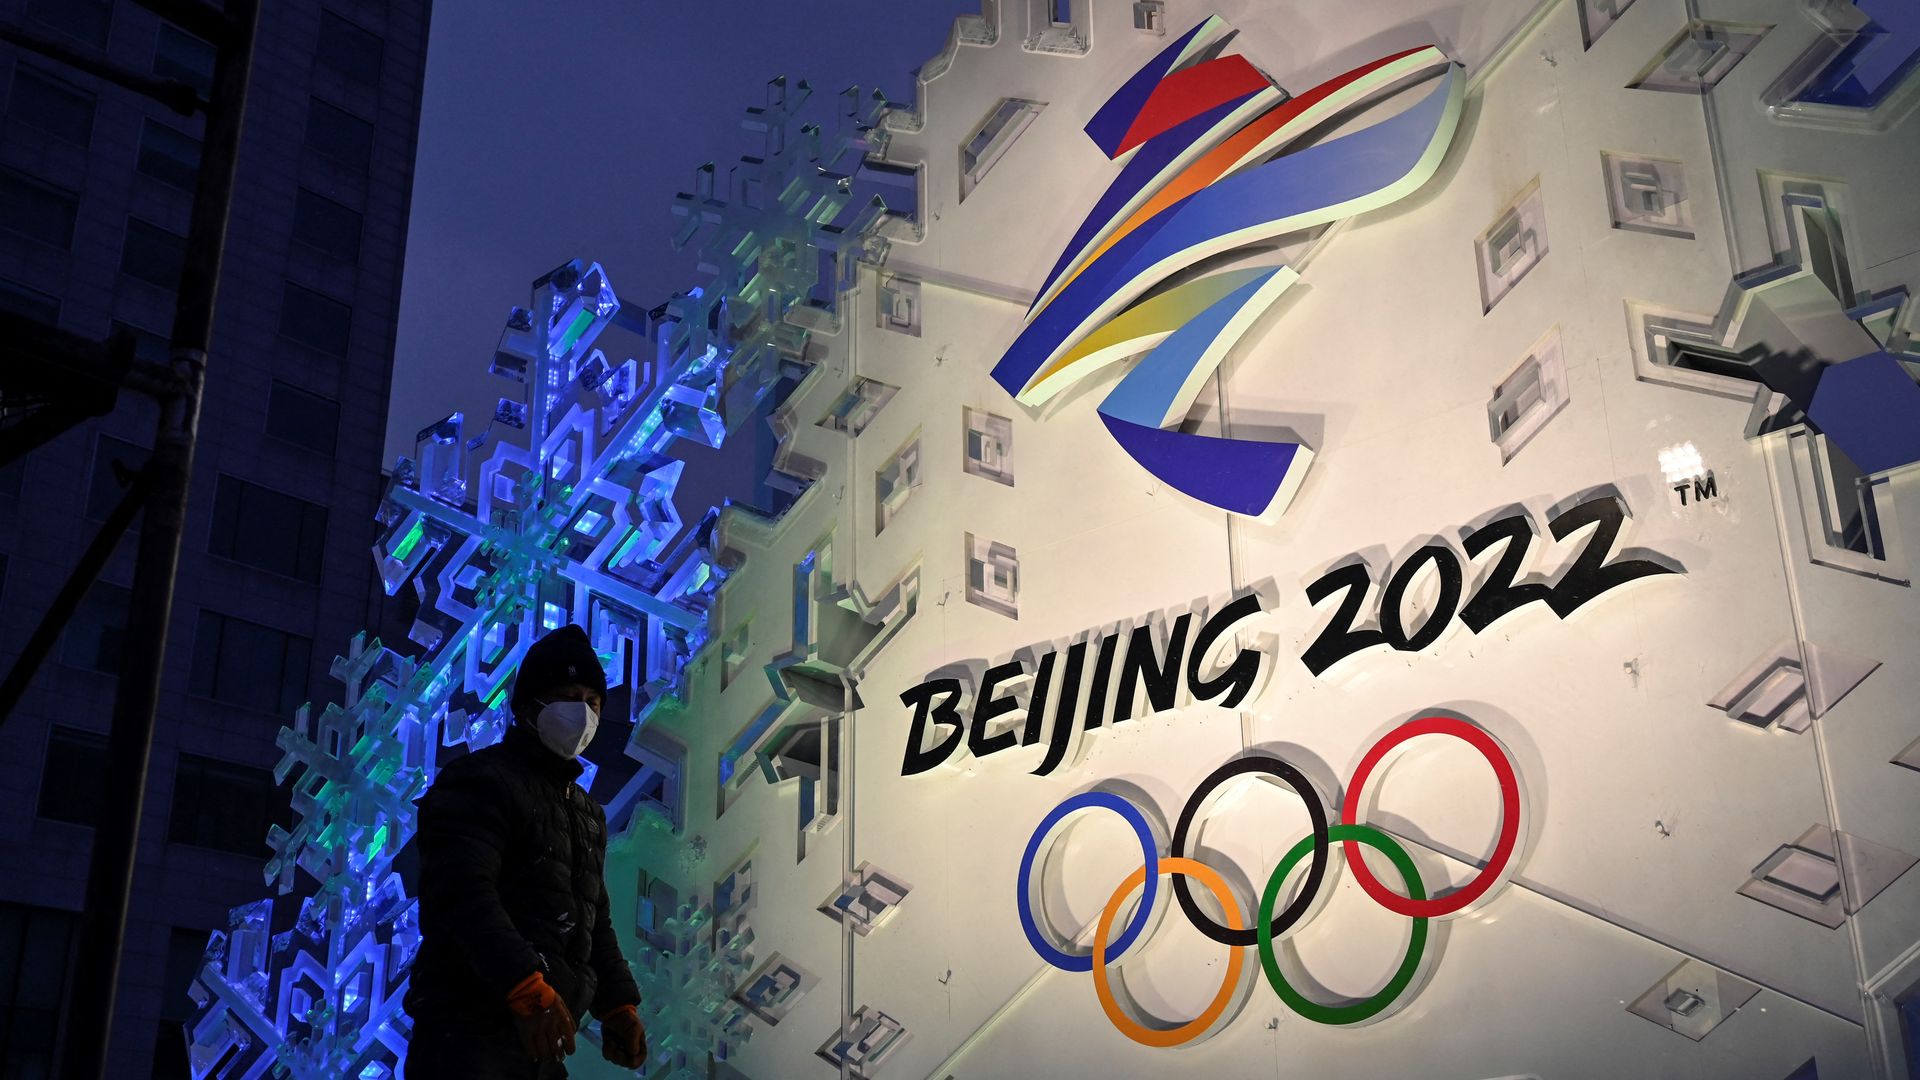 Athletes warned against speaking up on human rights at Beijing Games